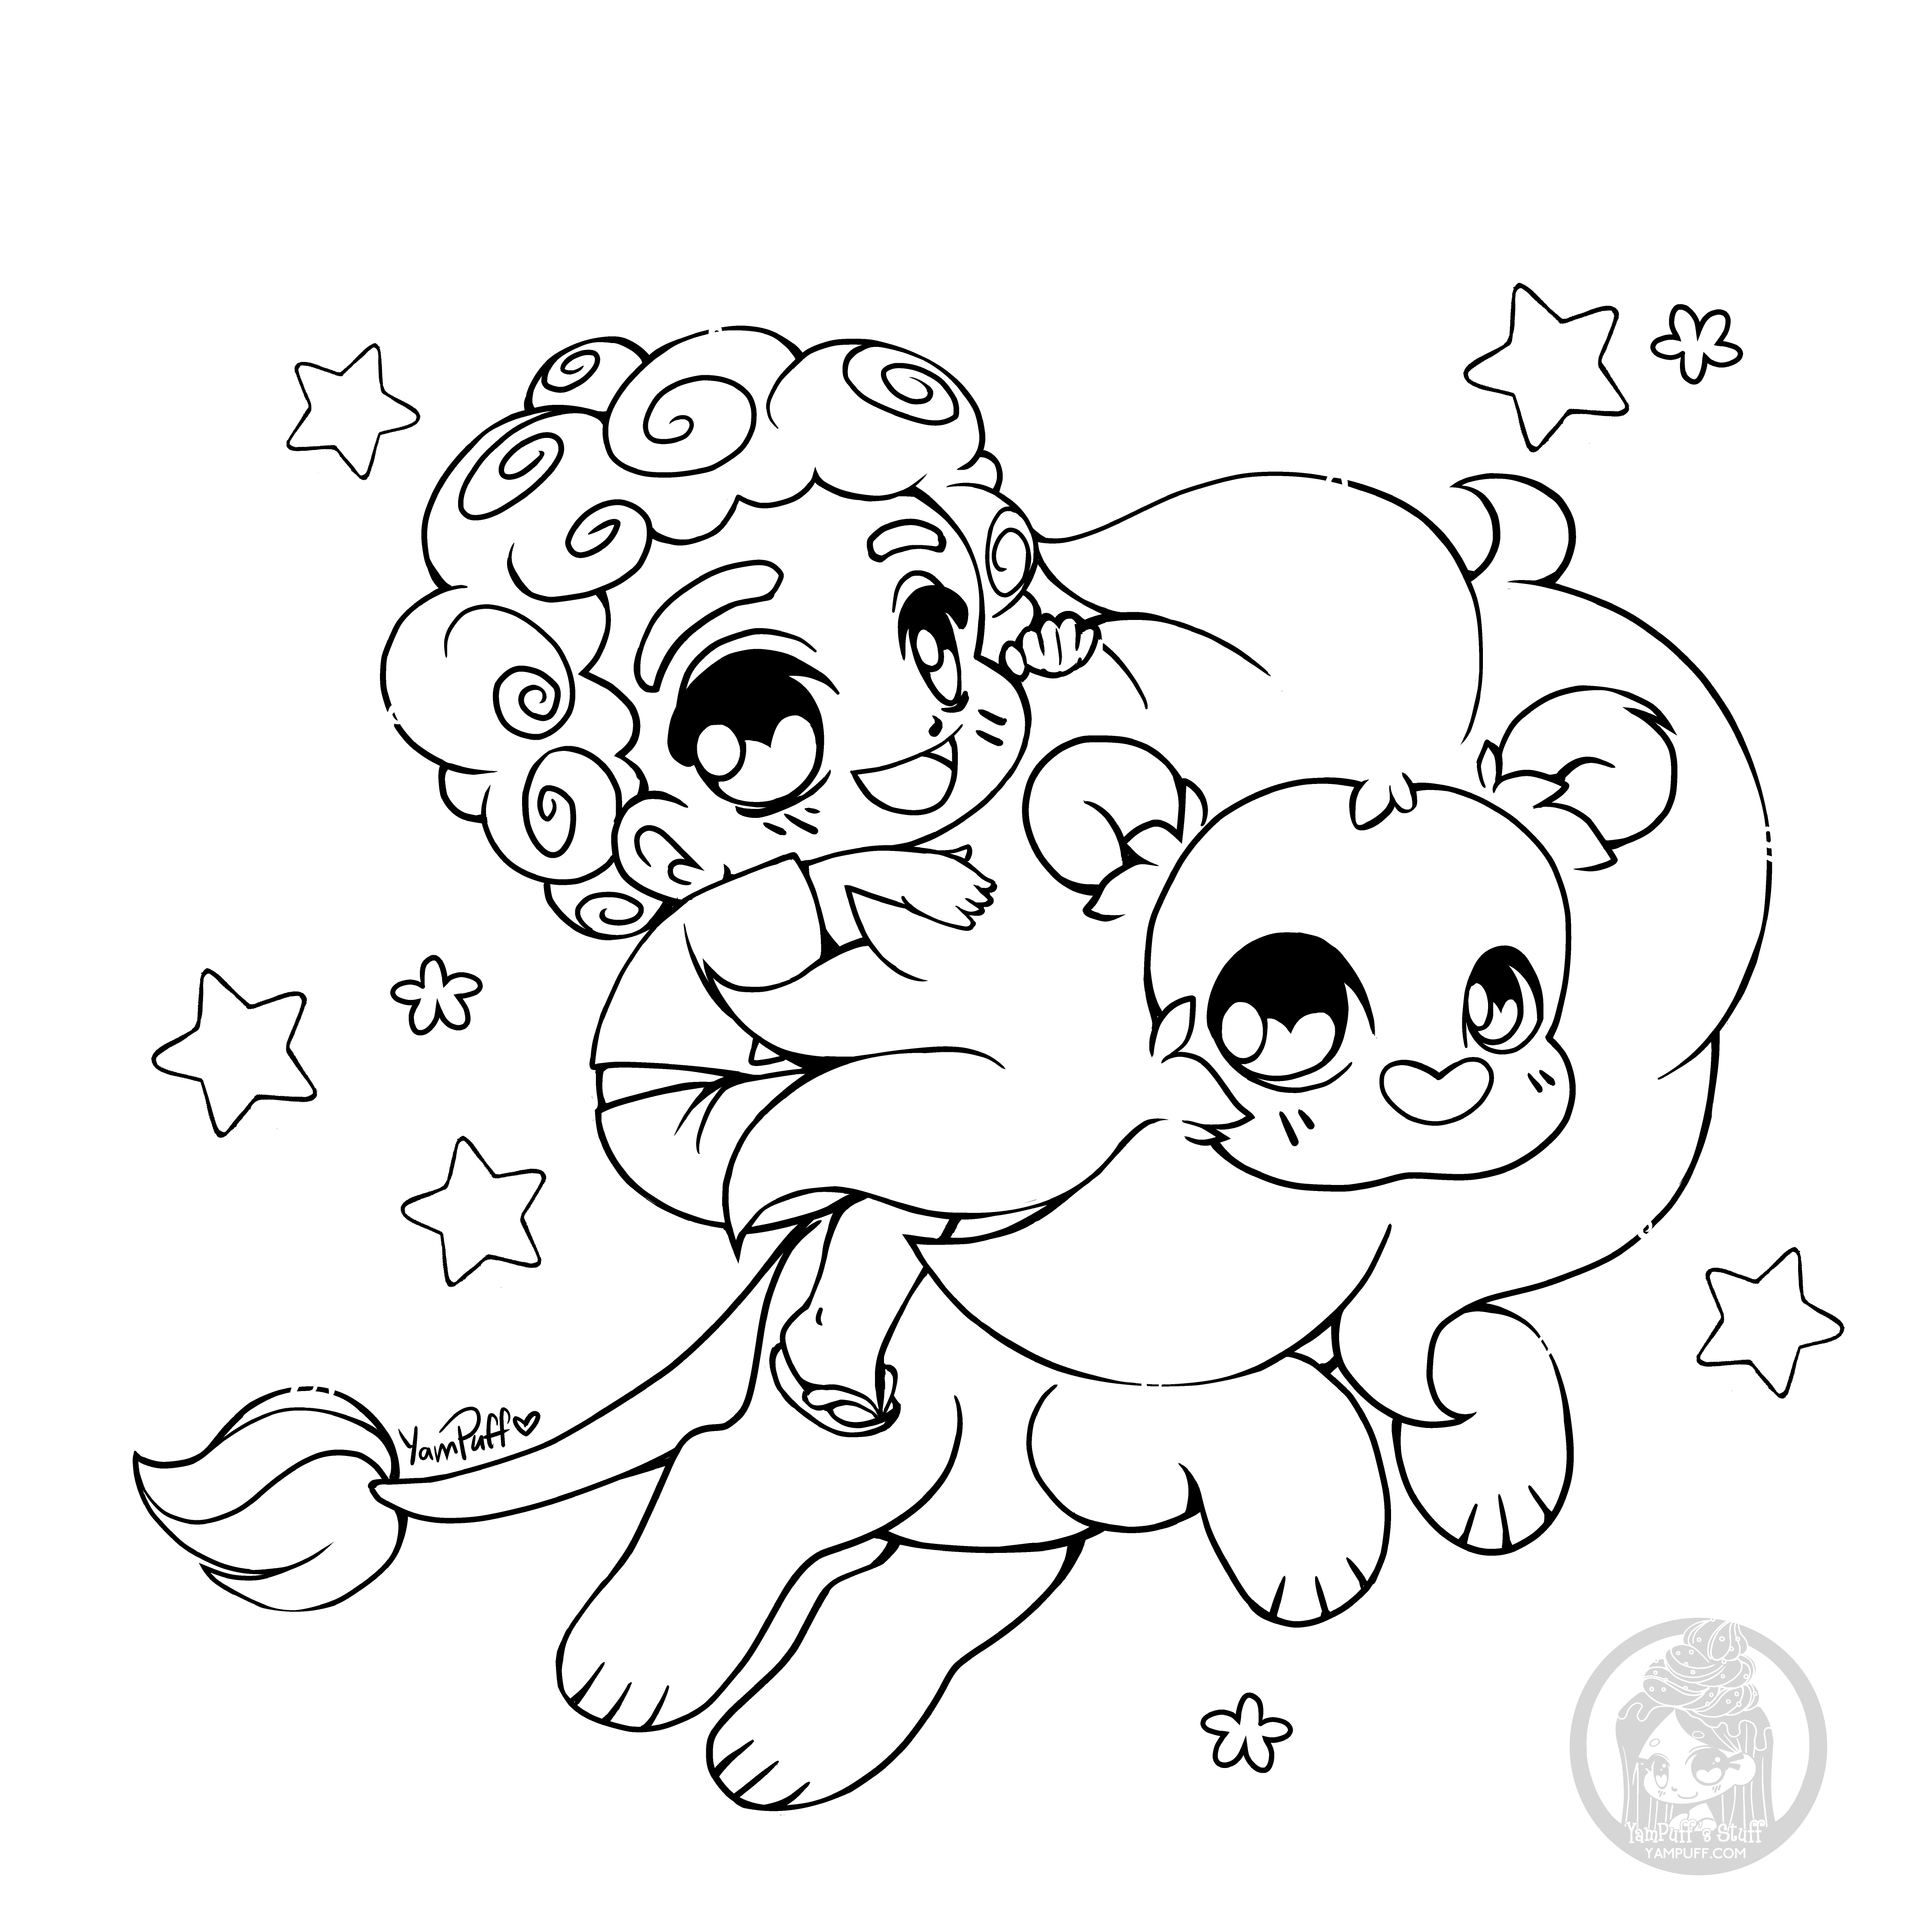 Fanart   Free Chibi Colouring Pages • YamPuff's Stuff   Coloring Home